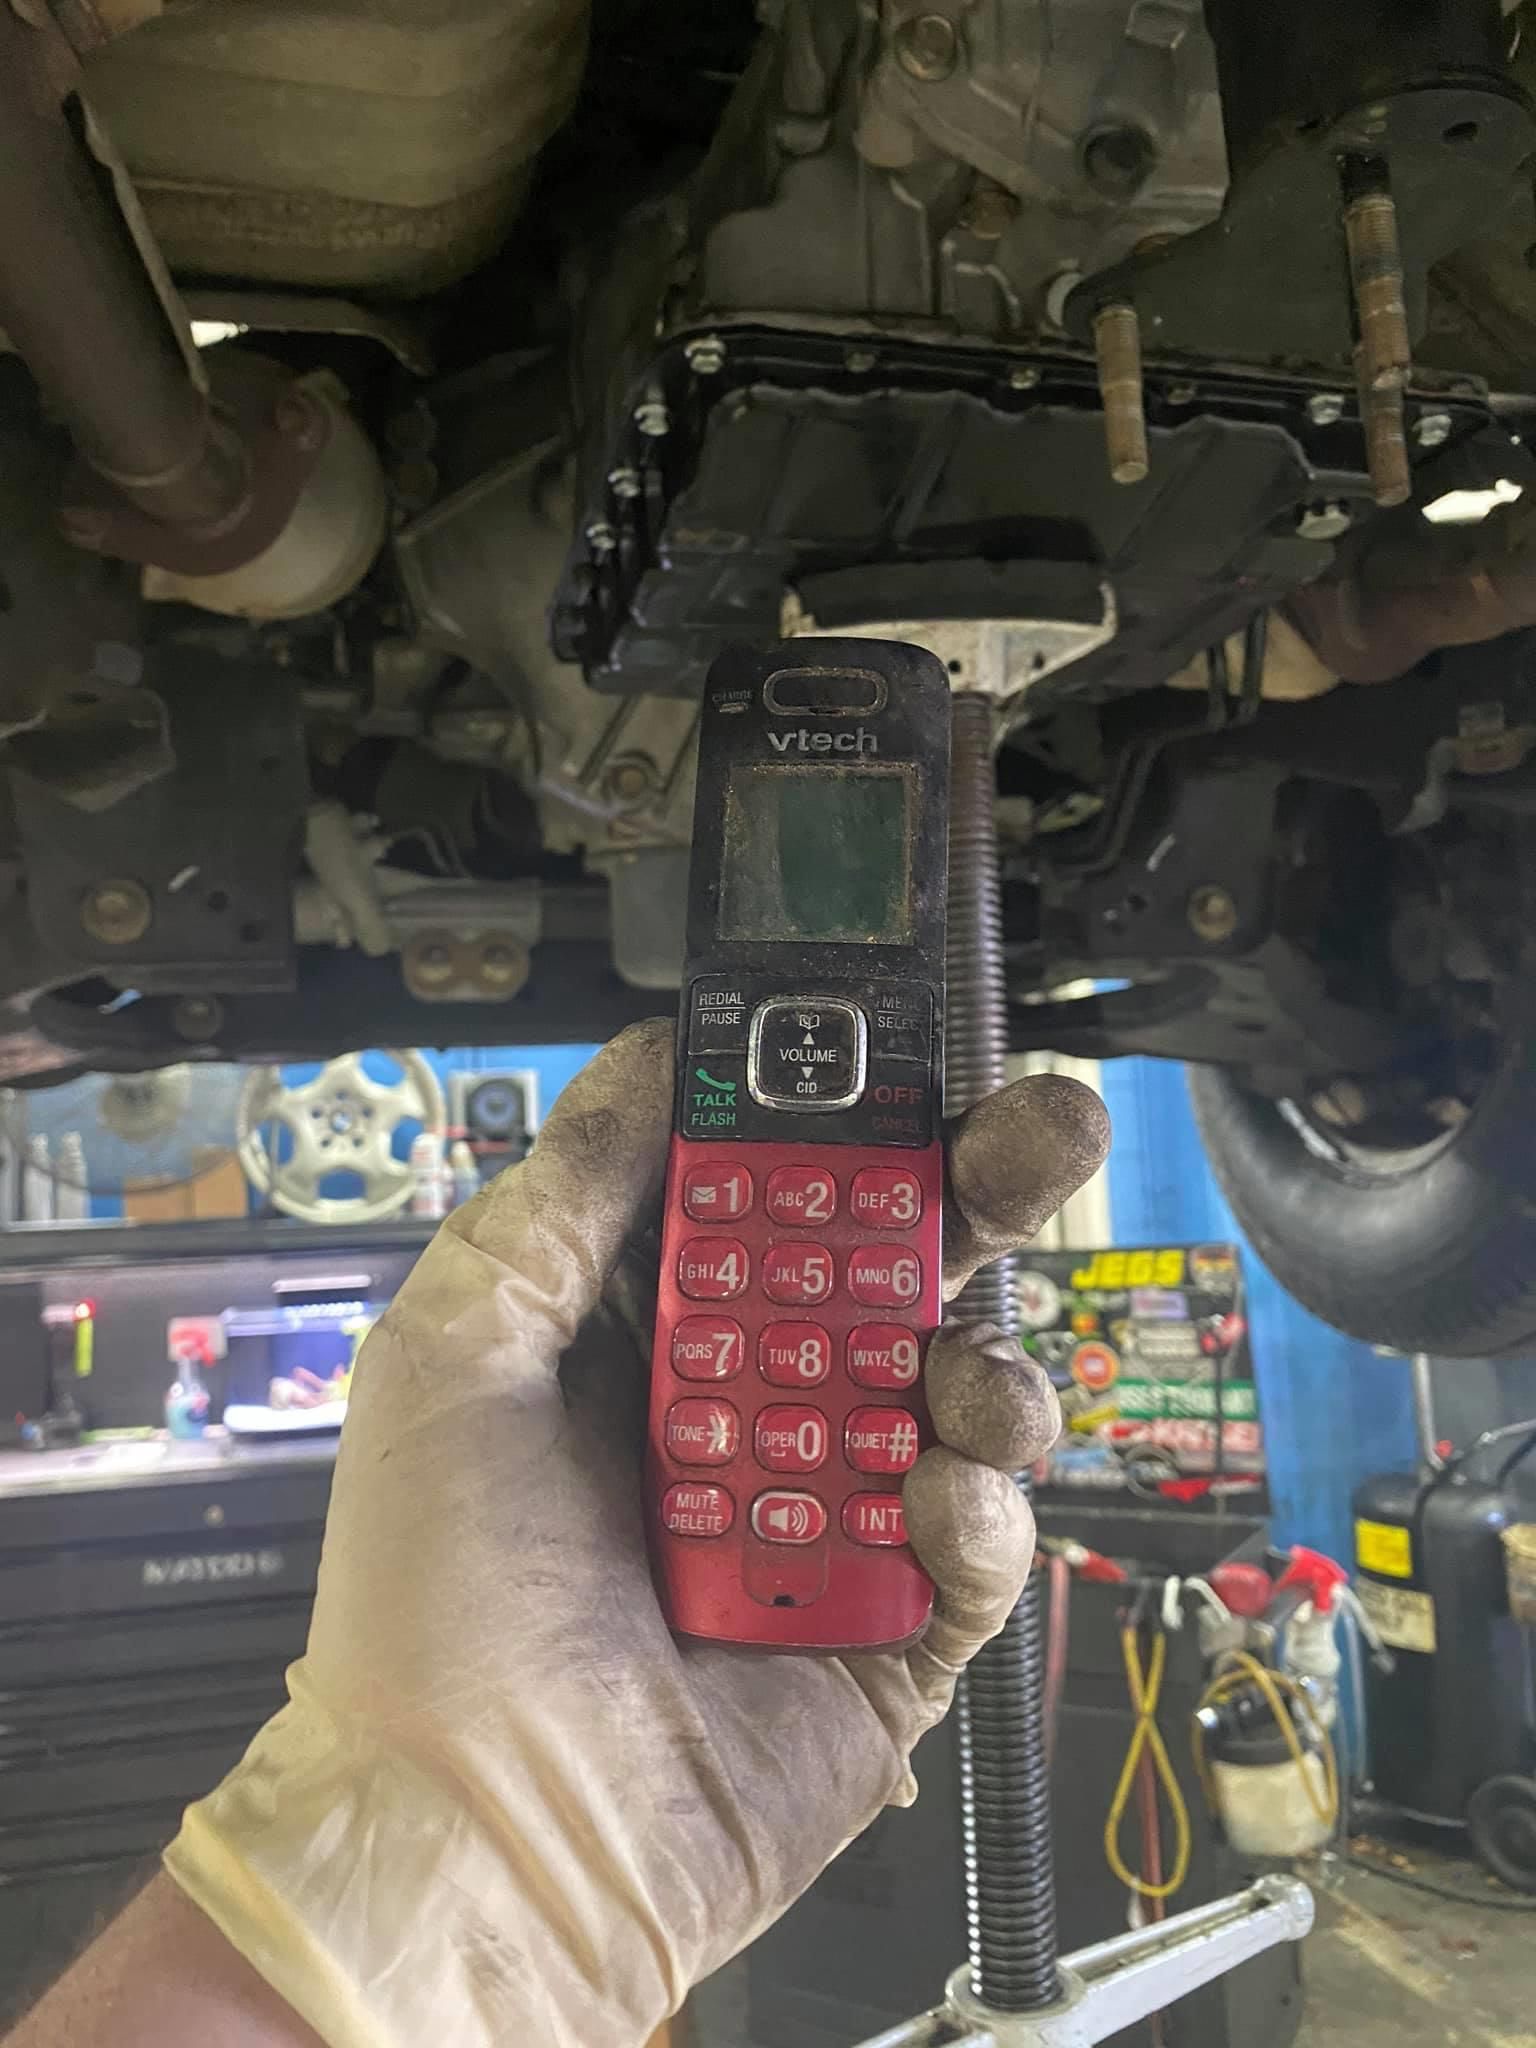 Hello? Is this the shop that previously worked on this Nissan and left half the bolts out of the subframe, trans pan, and loose mounts? Yeah just wanted to let you know I found your phone.